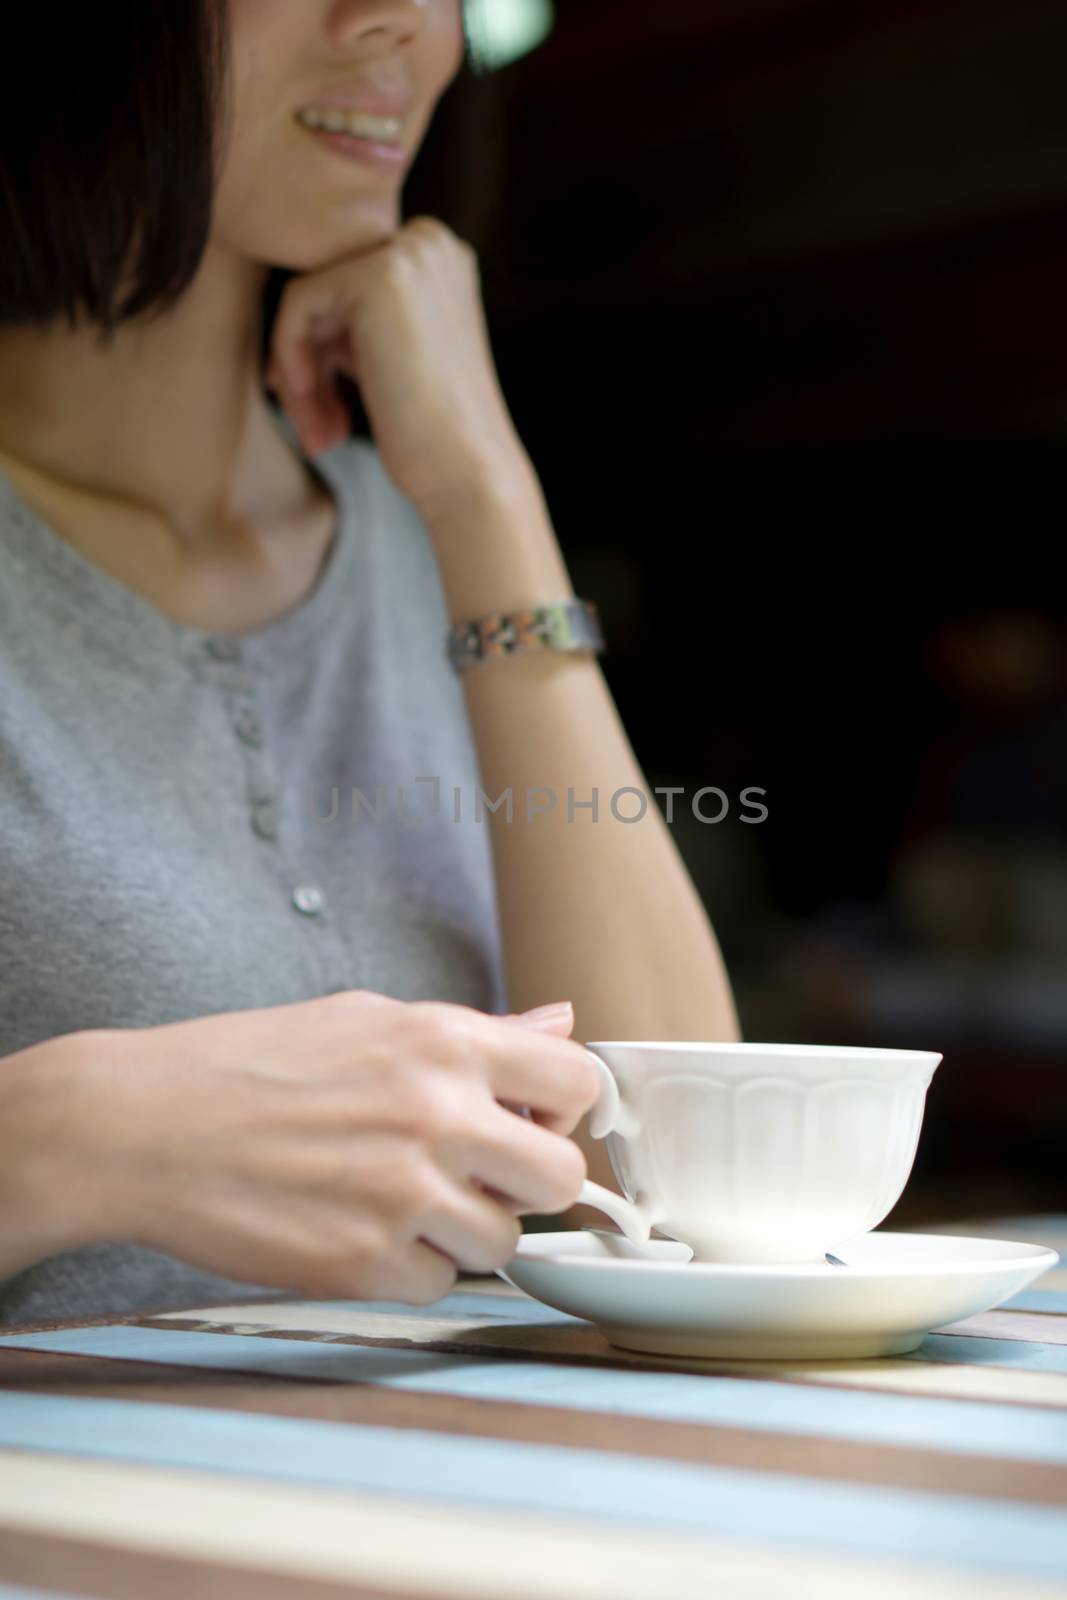 Girl's hands holding a cup of coffee